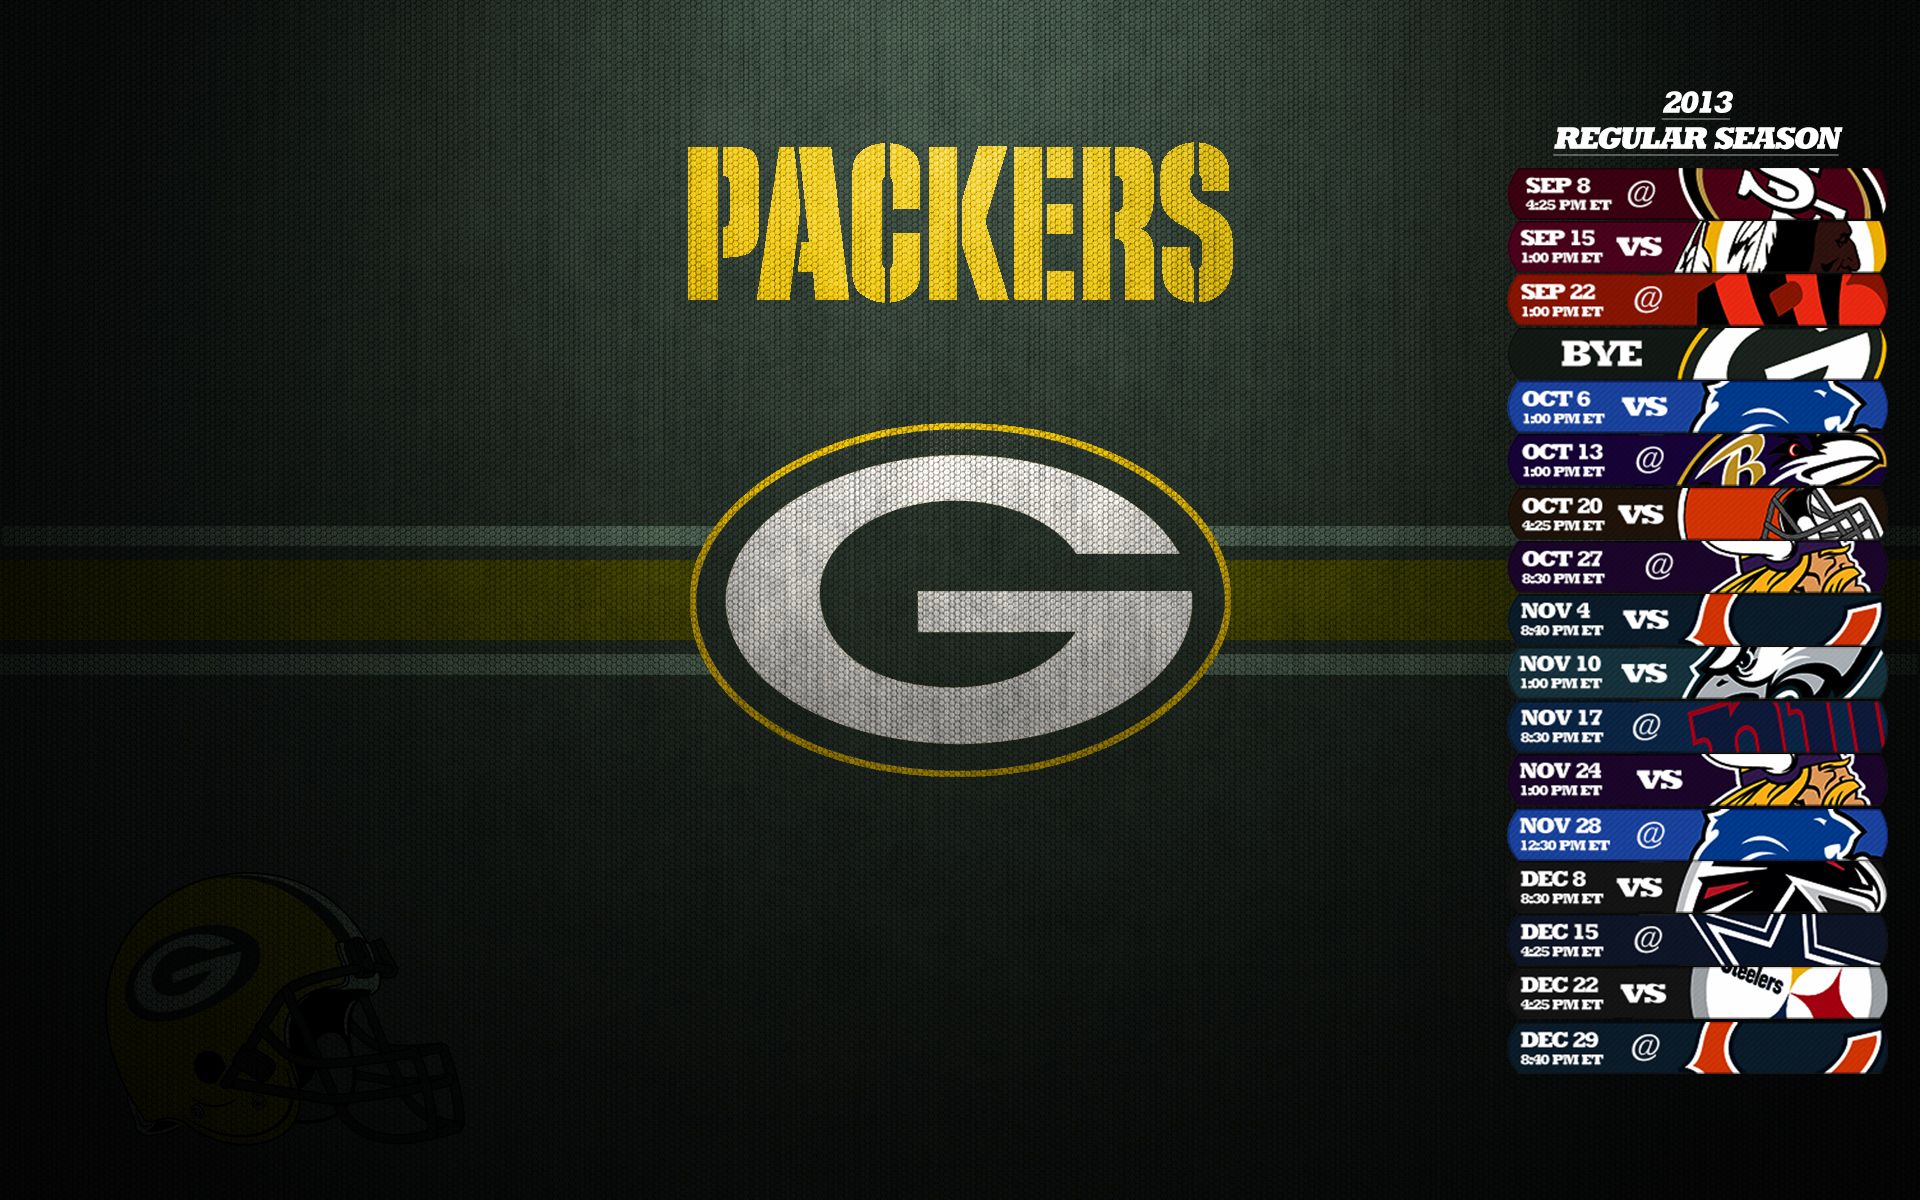 Green Bay Packers Schedule 2013 Wallpaper - Green Bay Packers